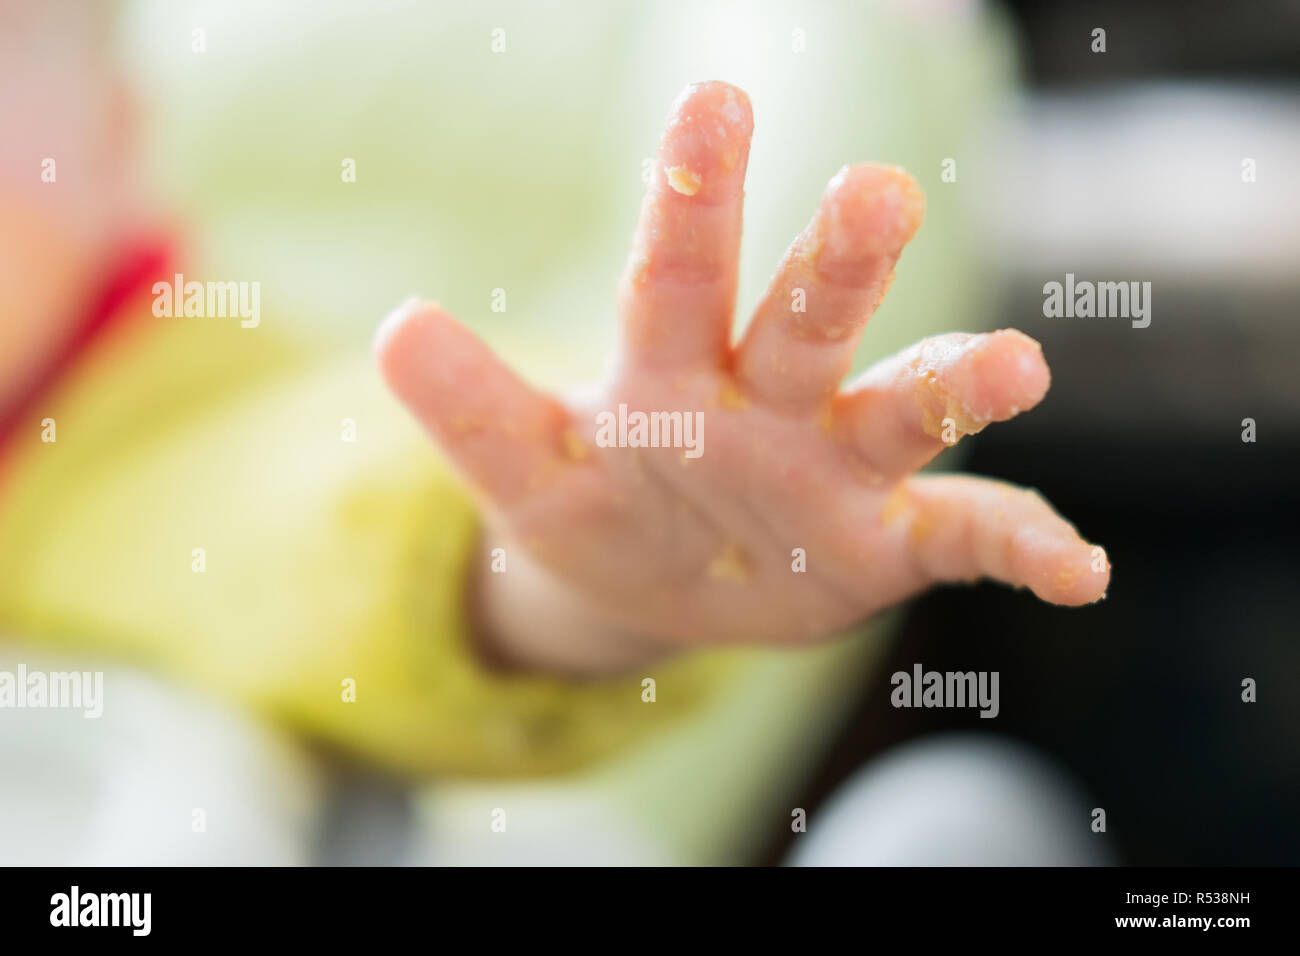 Close-up of a dirty palm of a baby hand Stock Photo